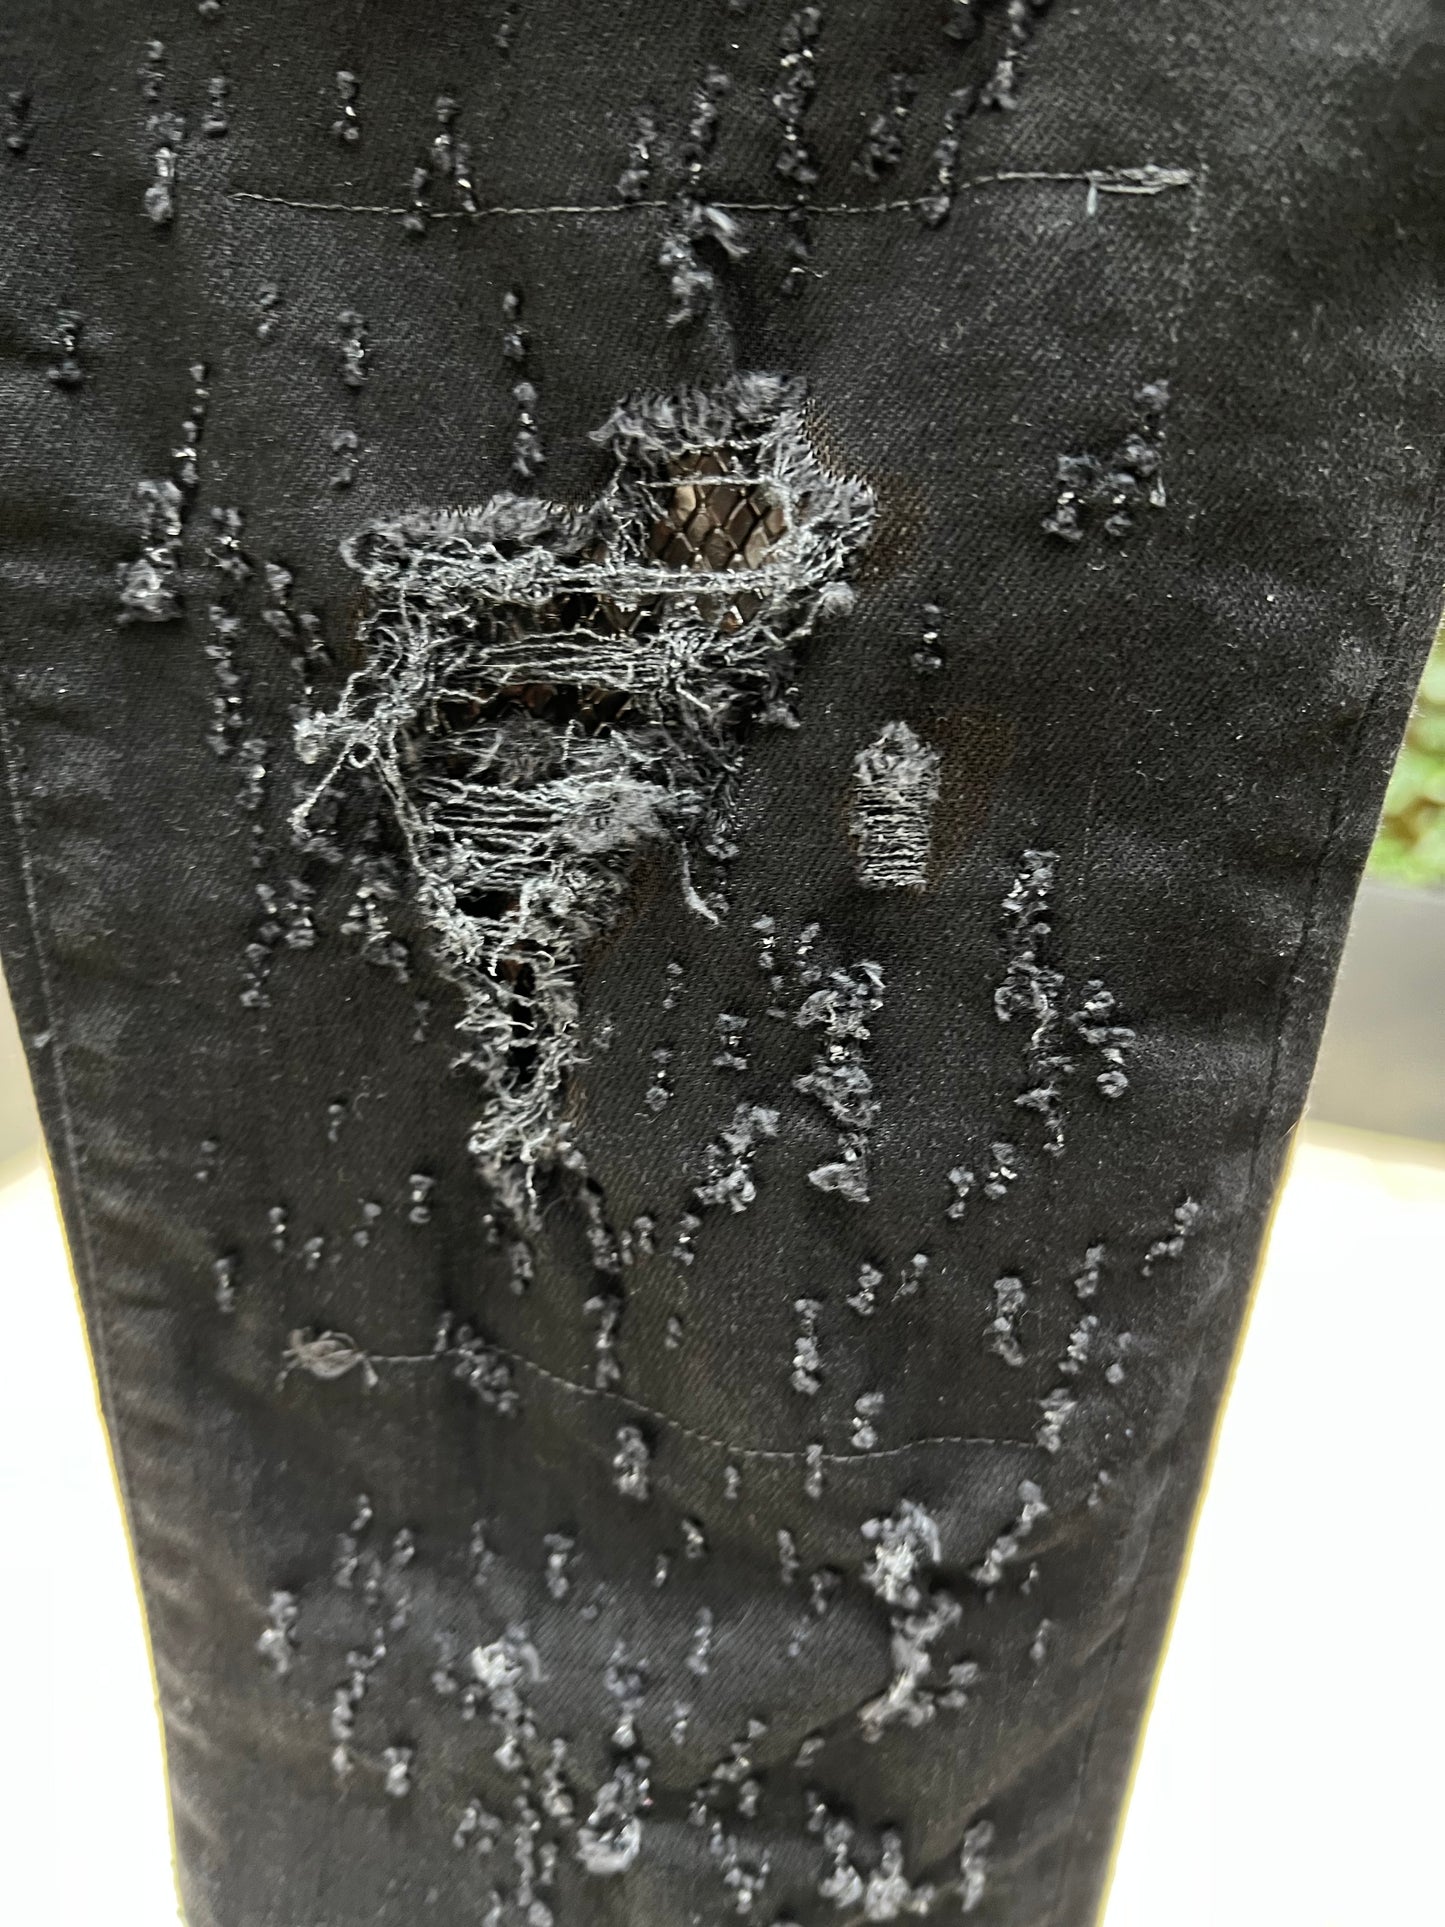 Close-up of RH45 JD18 TORNADO JEANS BLACK distressed premium denim fabric with visible tears and frayed threads.